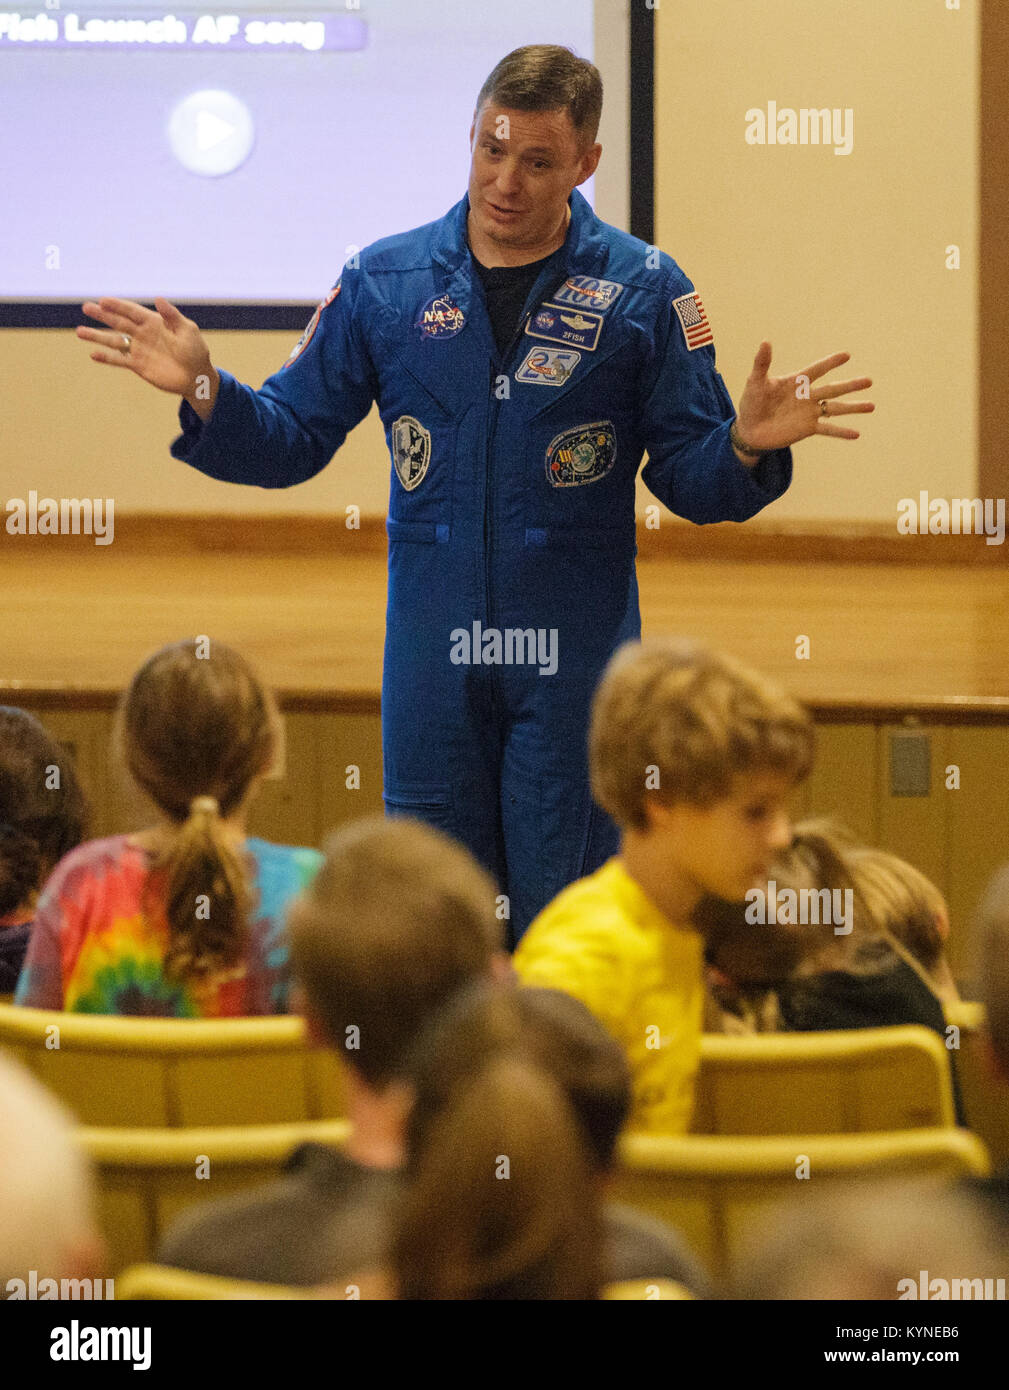 NASA astronaut Jack Fischer speaks about his time aboard the International Space Station as part of Expeditions 51 and 52, Saturday, Nov. 4, 2017 at the Rock Creek Park Nature Center and Planetarium in Washington, DC. During his 136 day mission aboard the ISS, Fischer conducted two spacewalks and hundreds of scientific experiments.  Photo Credit: (NASA/Joel Kowsky) Stock Photo